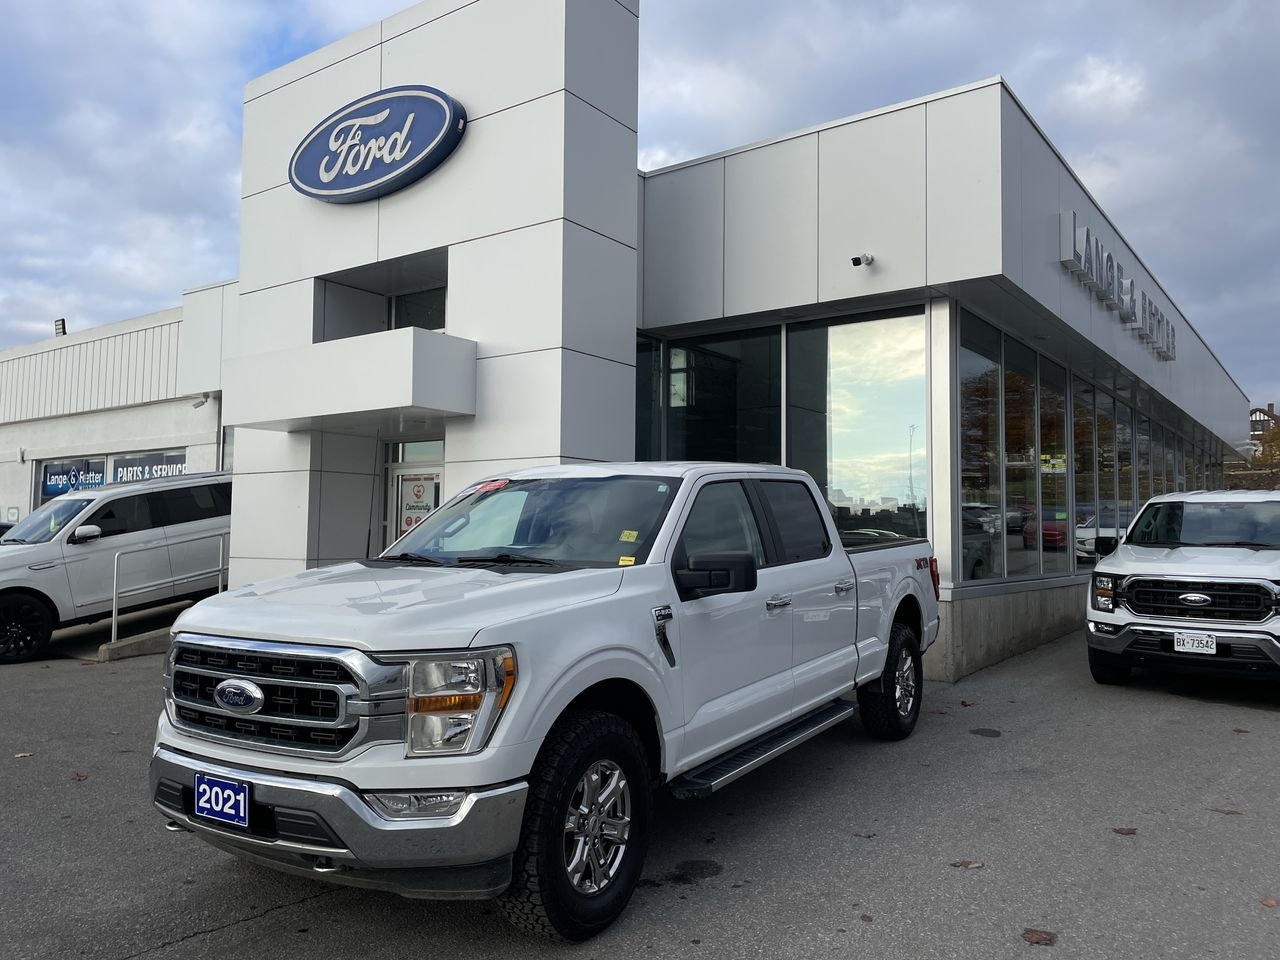 2021 Ford F-150 - 21385A Full Image 1